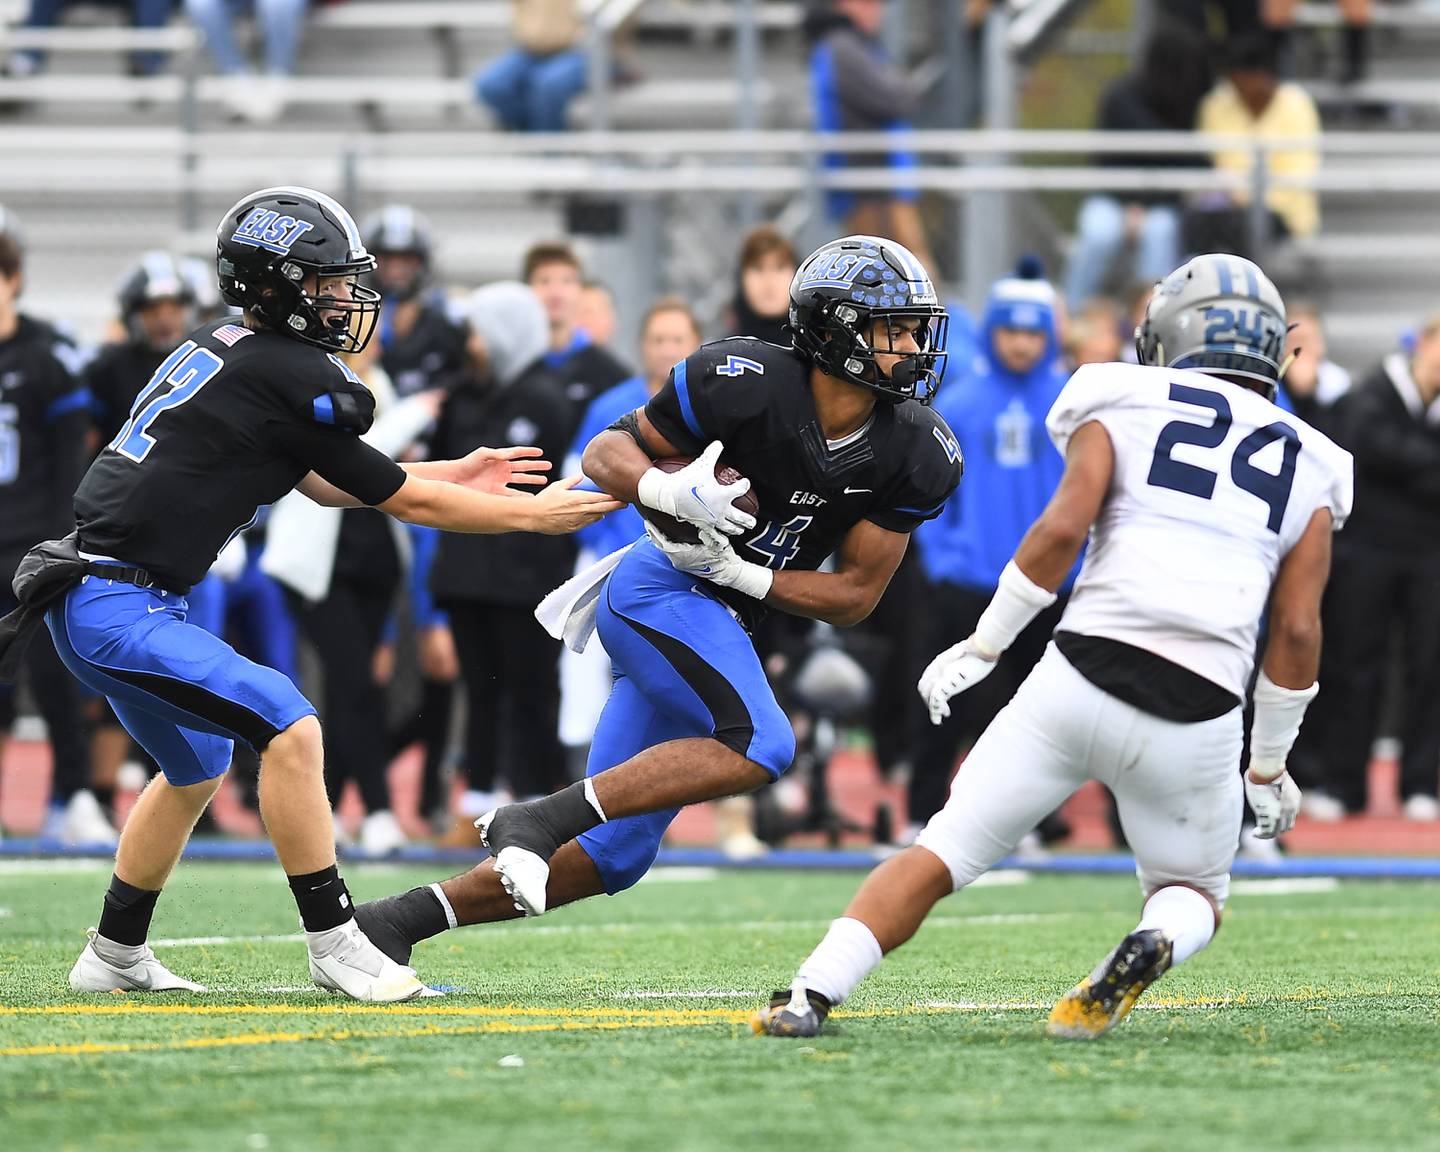 Lincoln-Way East's Trey Johnson (4) attempting to run for big gain against Oswego East on Saturday, Oct. 30, 2021, at Lincoln-Way East High School in Frankfort.